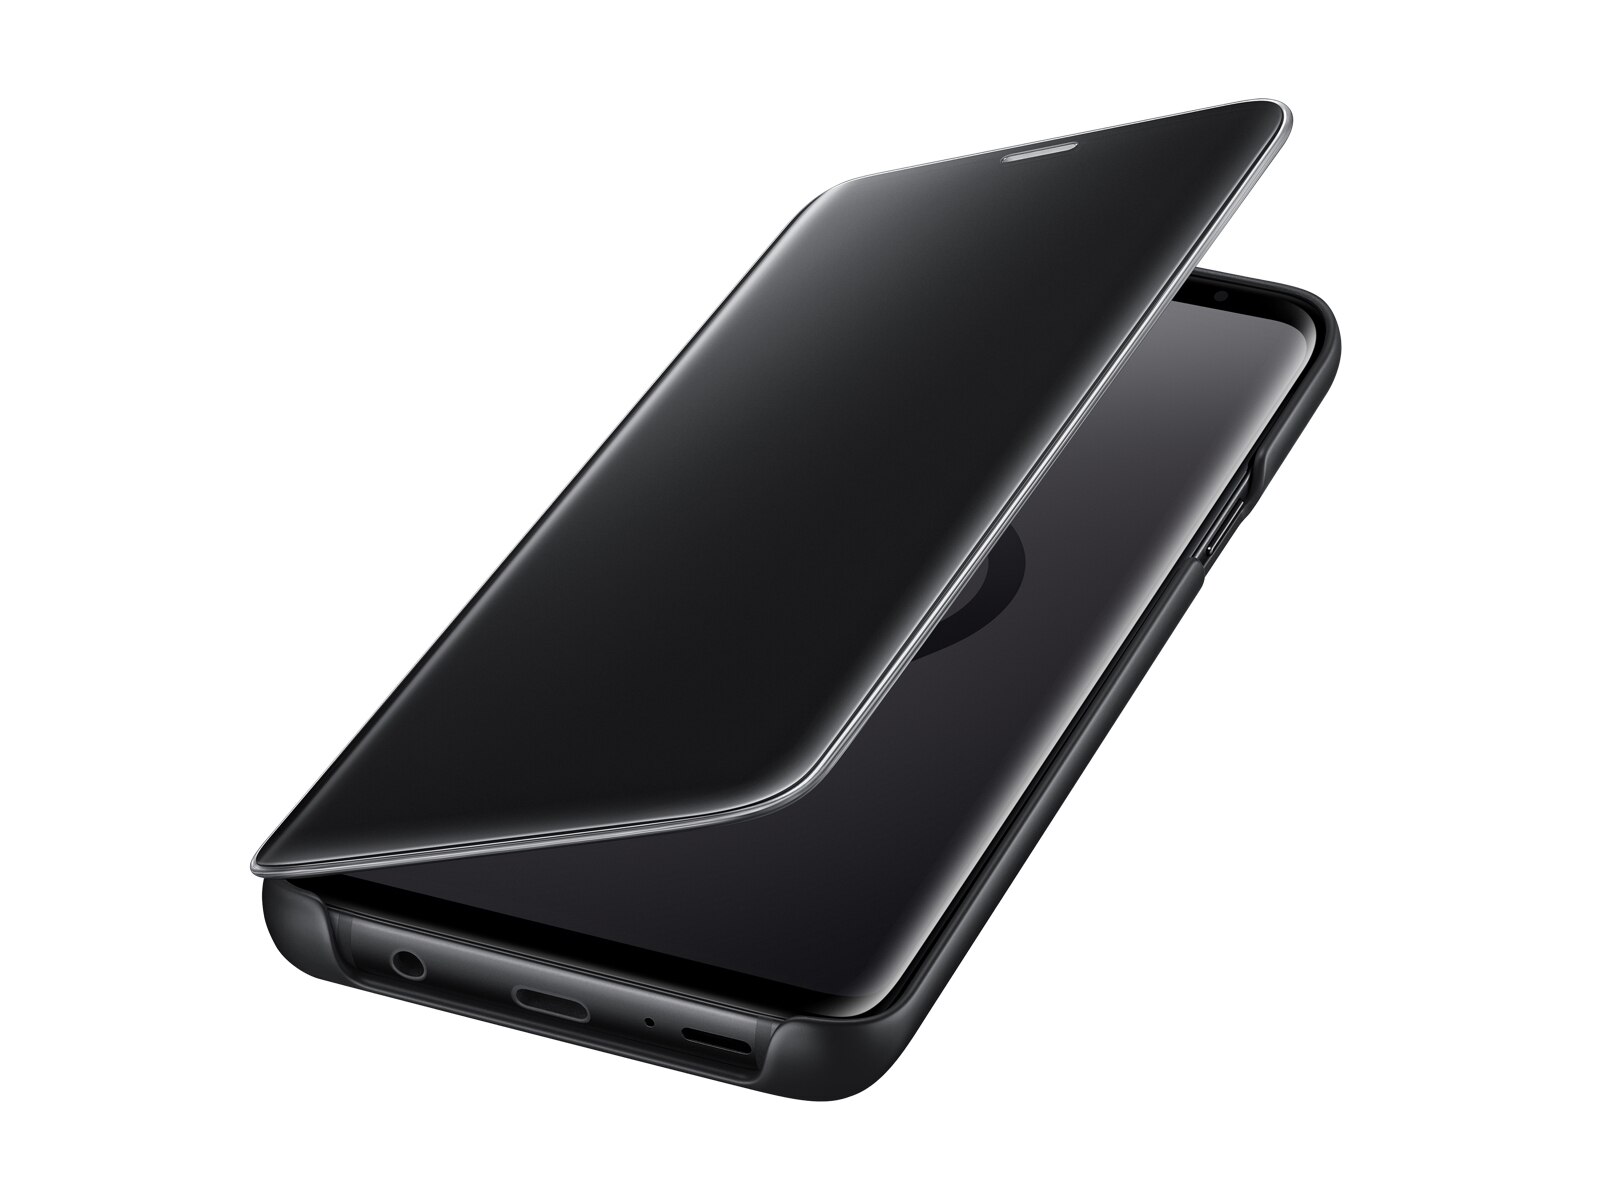 Samsung Led View Cover S9 Black